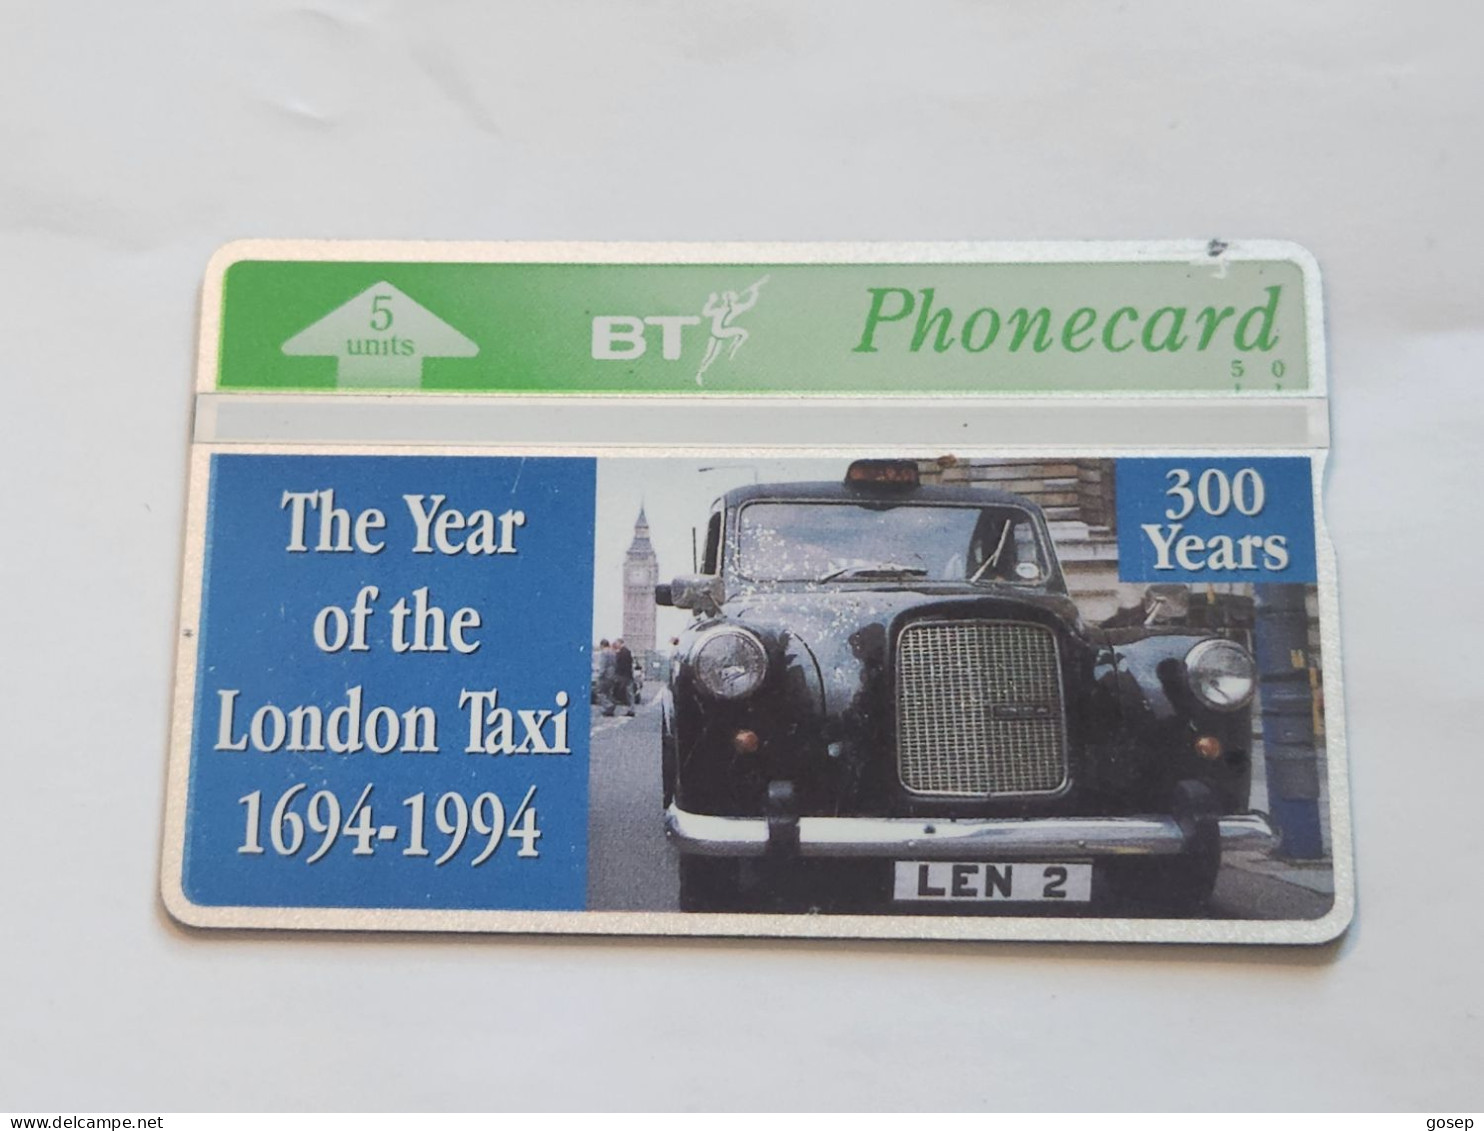 United Kingdom-(BTG-404)-Year OF The London Taxi-(346)(5units)(429G19699)(tirage-500)-price Cataloge-8.00£-mint - BT General Issues